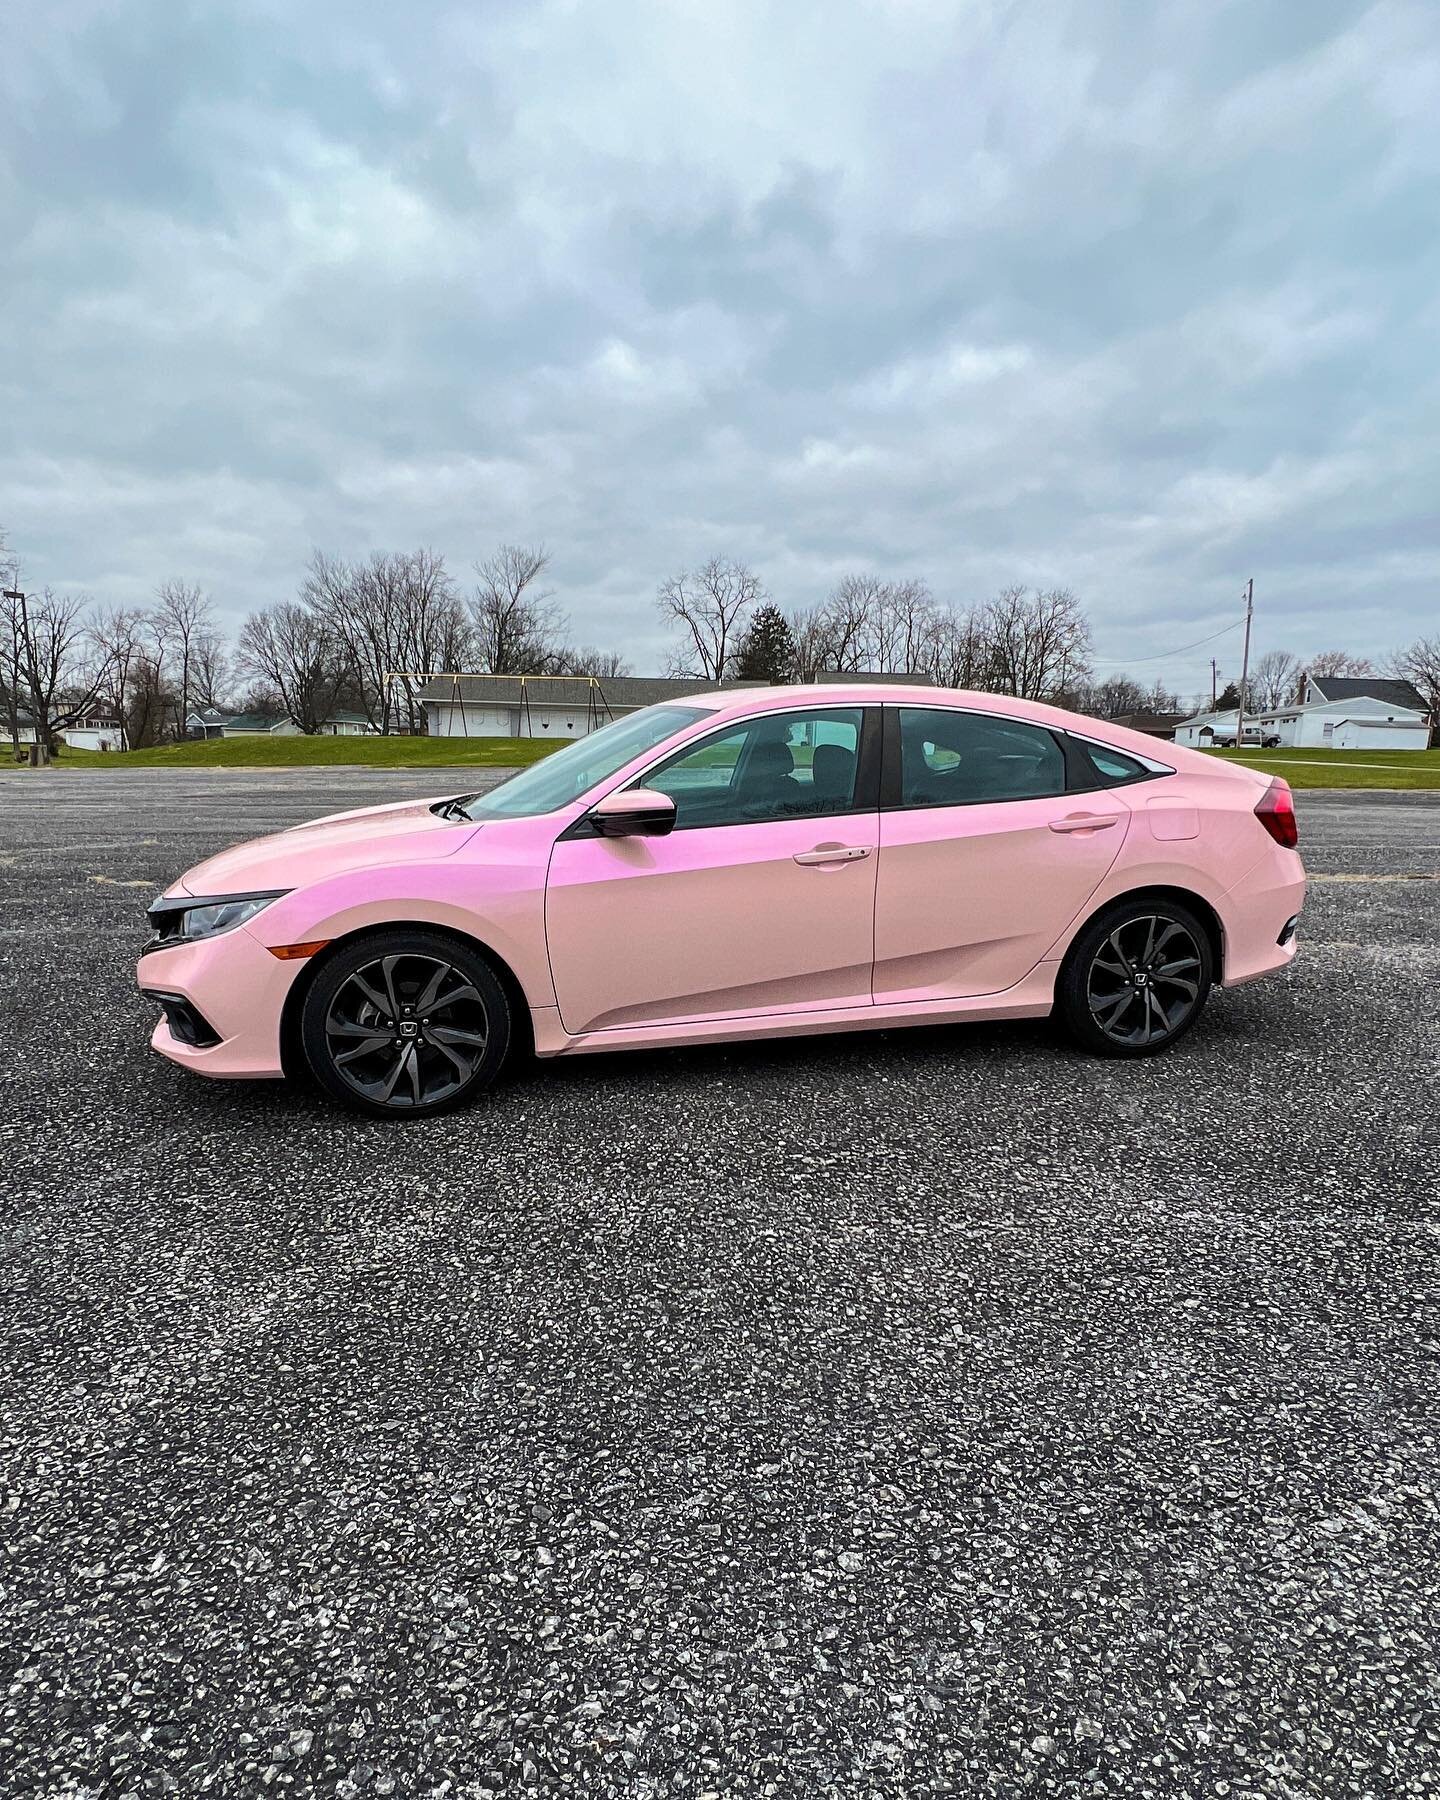 The sun is never out when you need it 🙇&zwj;♂️
&bull;
Full wrap in candy metallic purple pink
&bull;
Contact for a quote!
Crucialwraps.com
&bull;
Vehicle Wraps
Livery Designs
Paint Protection Film 
Ceramic Coatings for Vinyl
&bull;
#crucialwraps #fe